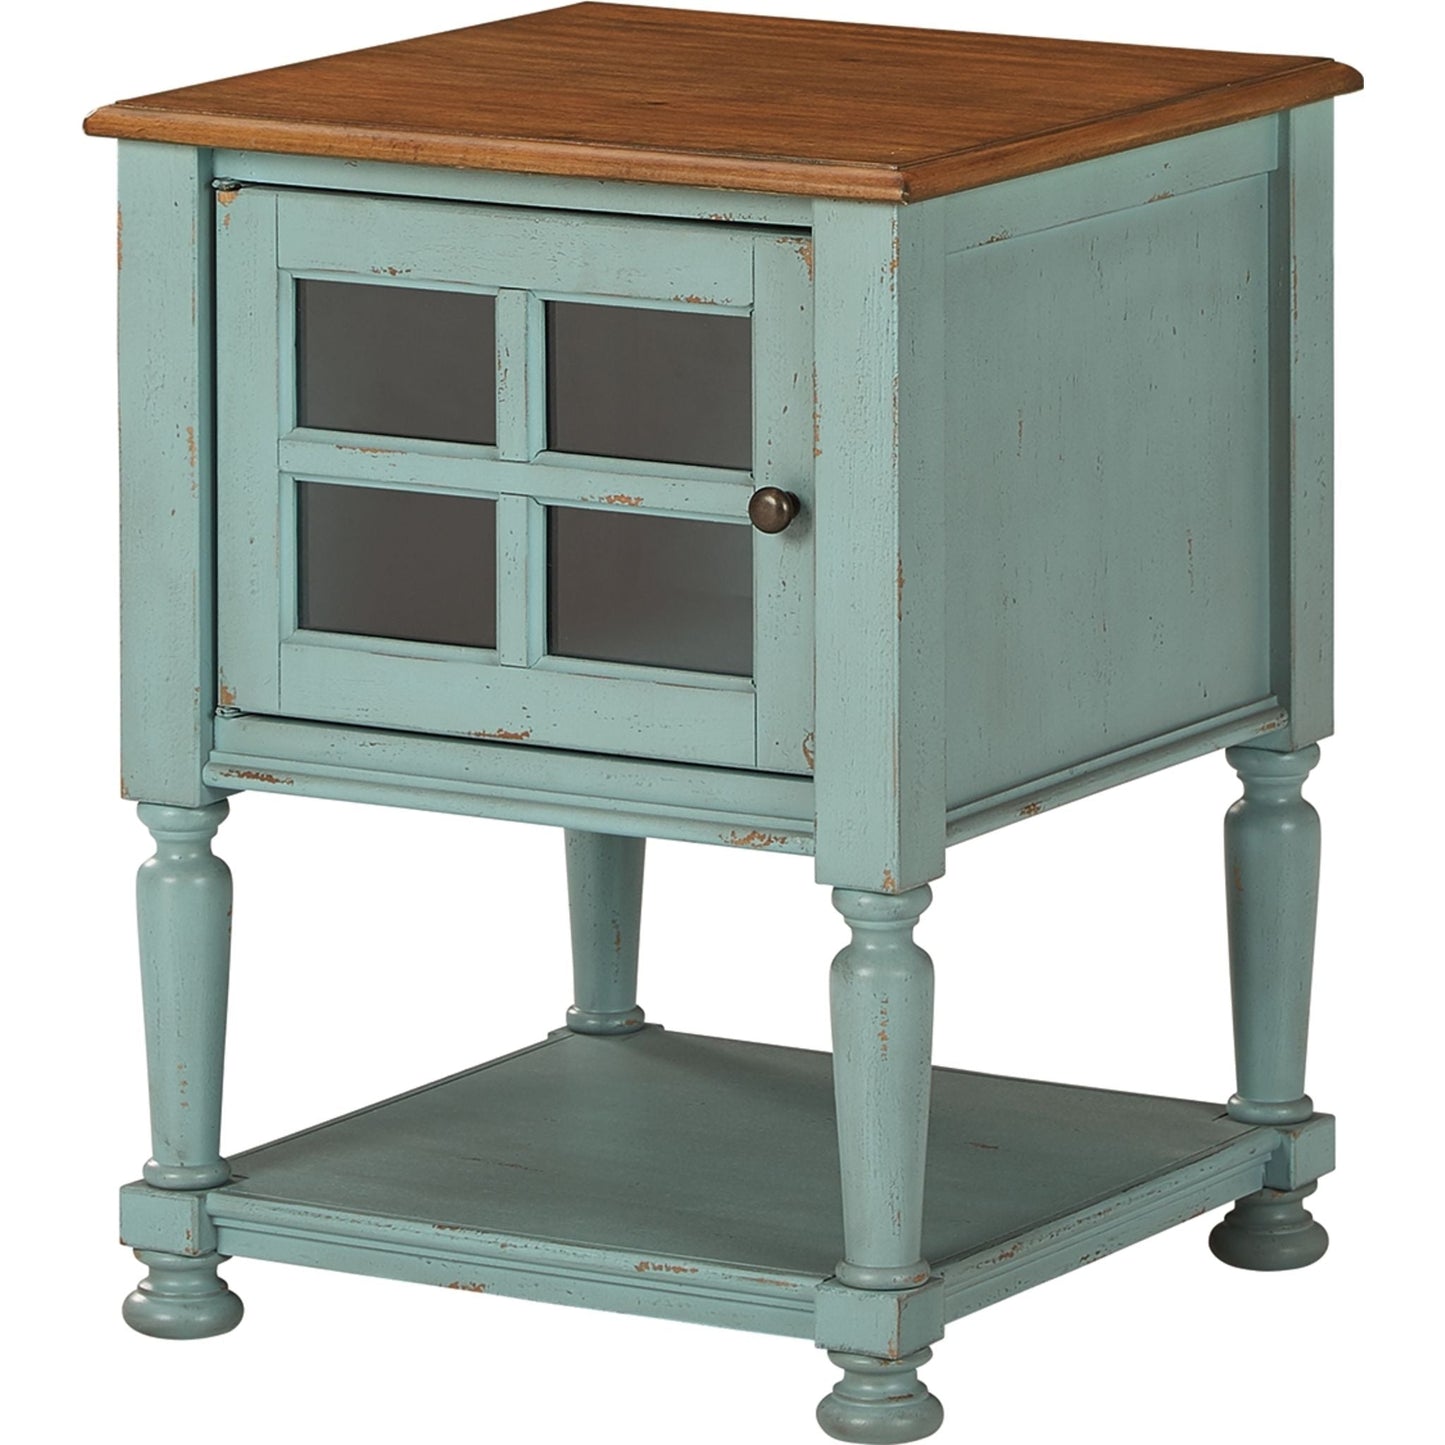 Mirimyn Accent Cabinet - Teal/Brown